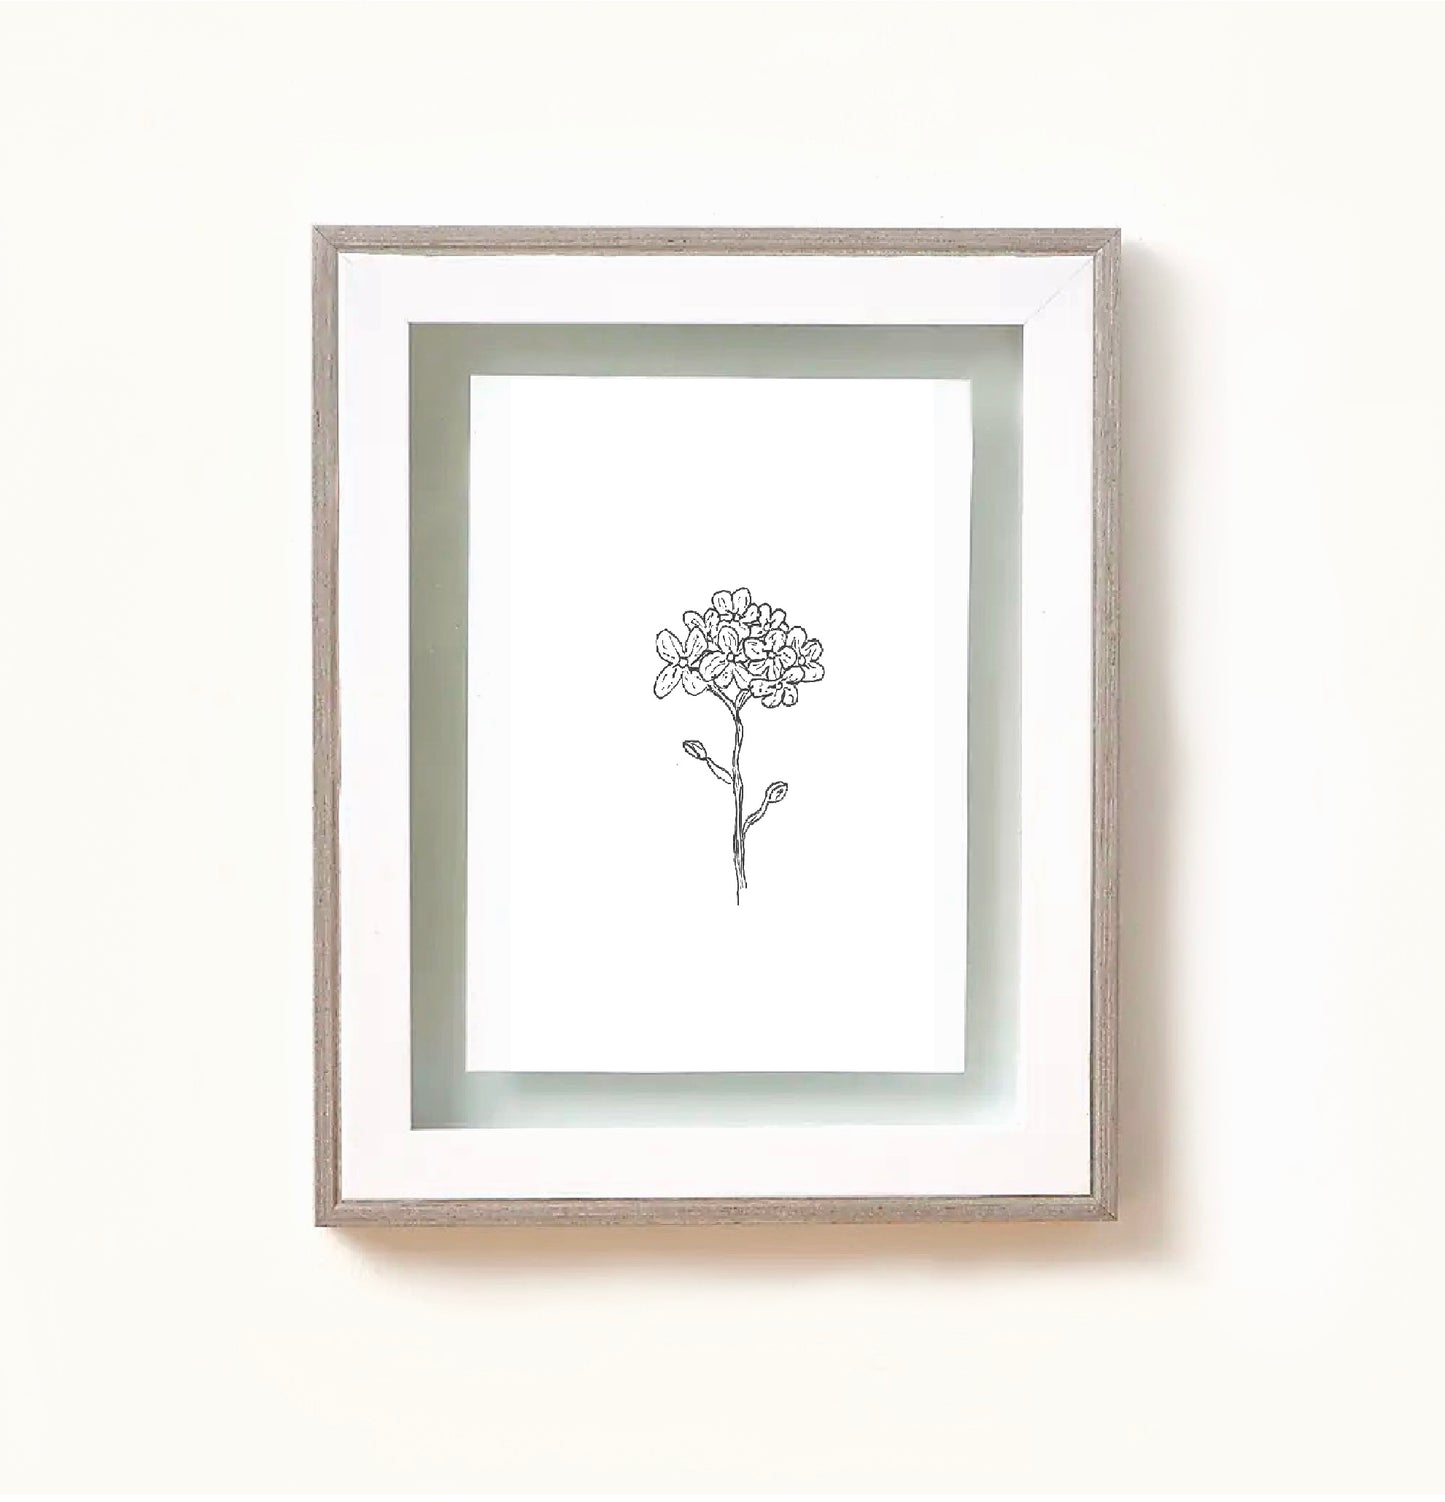 Forget me not flowers drawn in black ink on white paper, framed in a white and white washed wooden frame